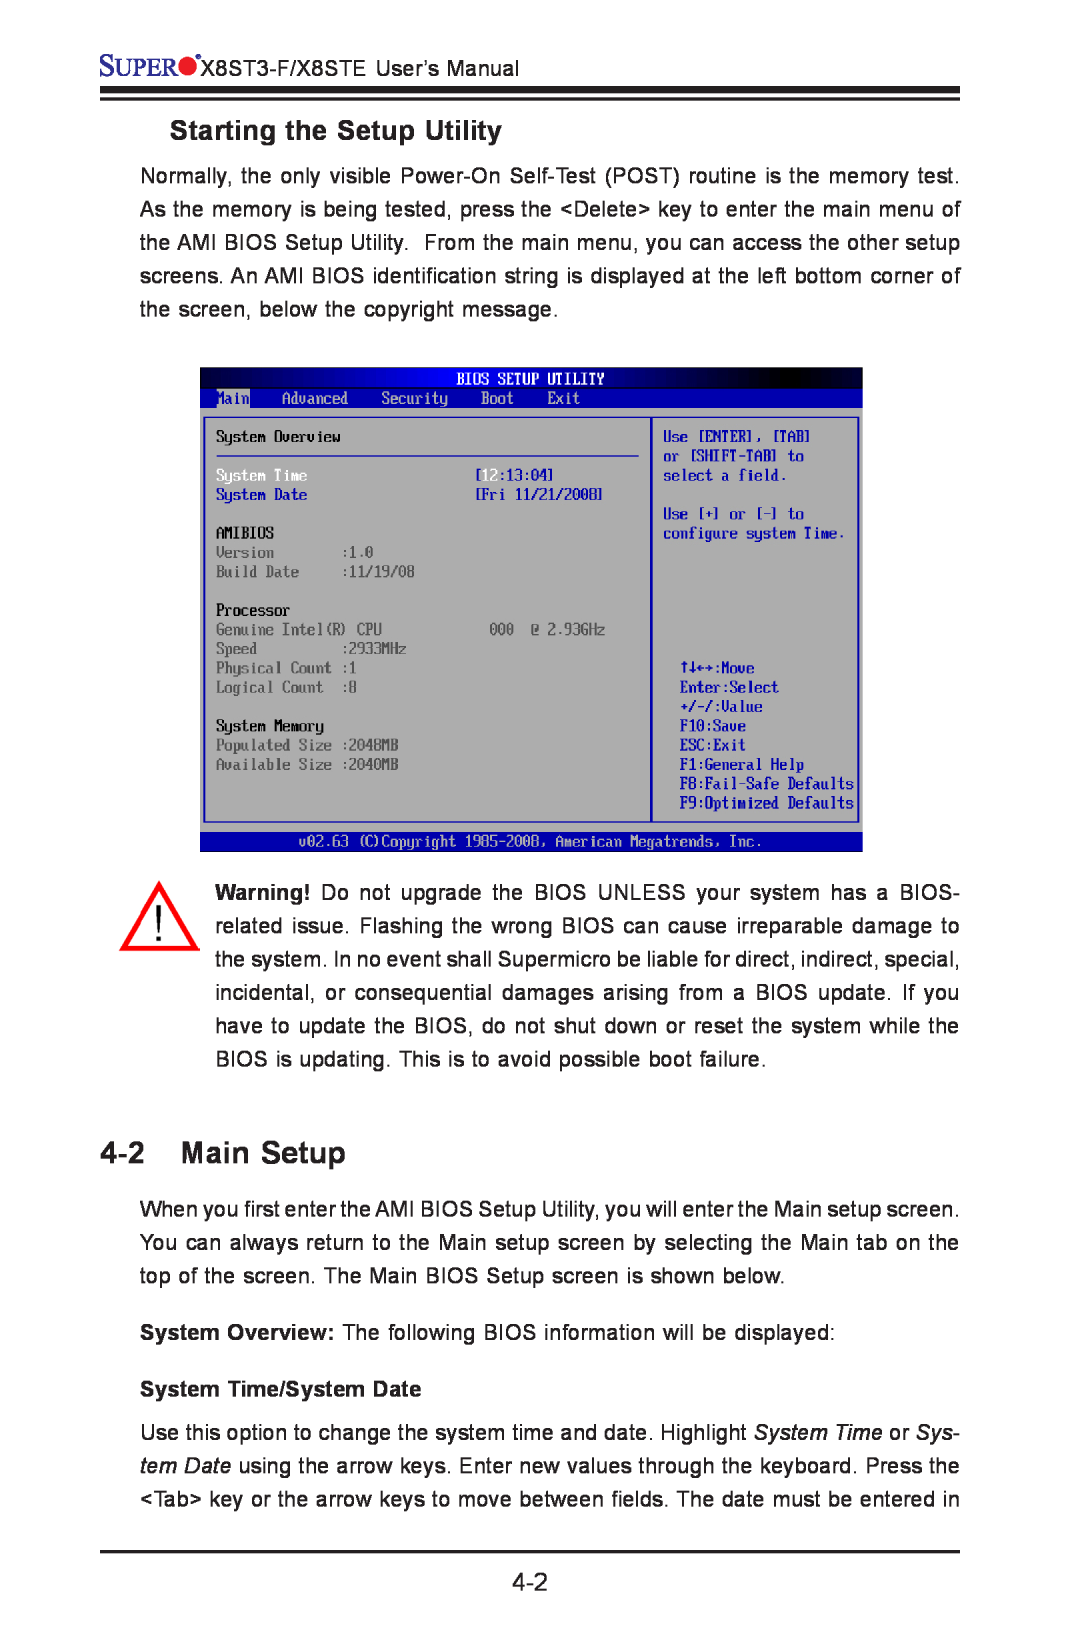 SUPER MICRO Computer X8ST3-F, X8STE user manual Main Setup, Starting the Setup Utility, System Time/System Date 